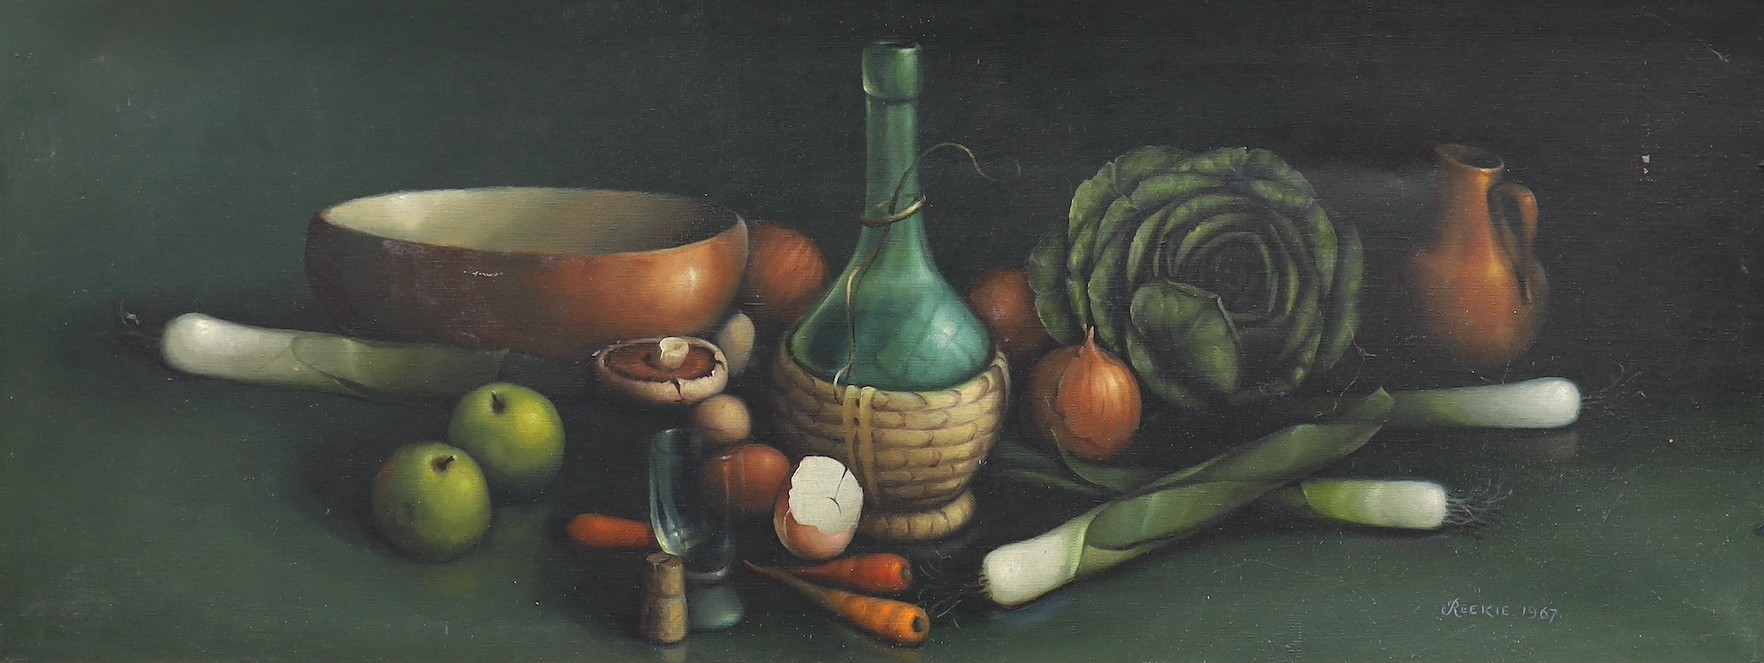 G.L. Reekie, oil on canvas, Earthenware bowl with Chianti bottle, signed and dated 1967, Stacy Marks label verso, 35 x 90cm